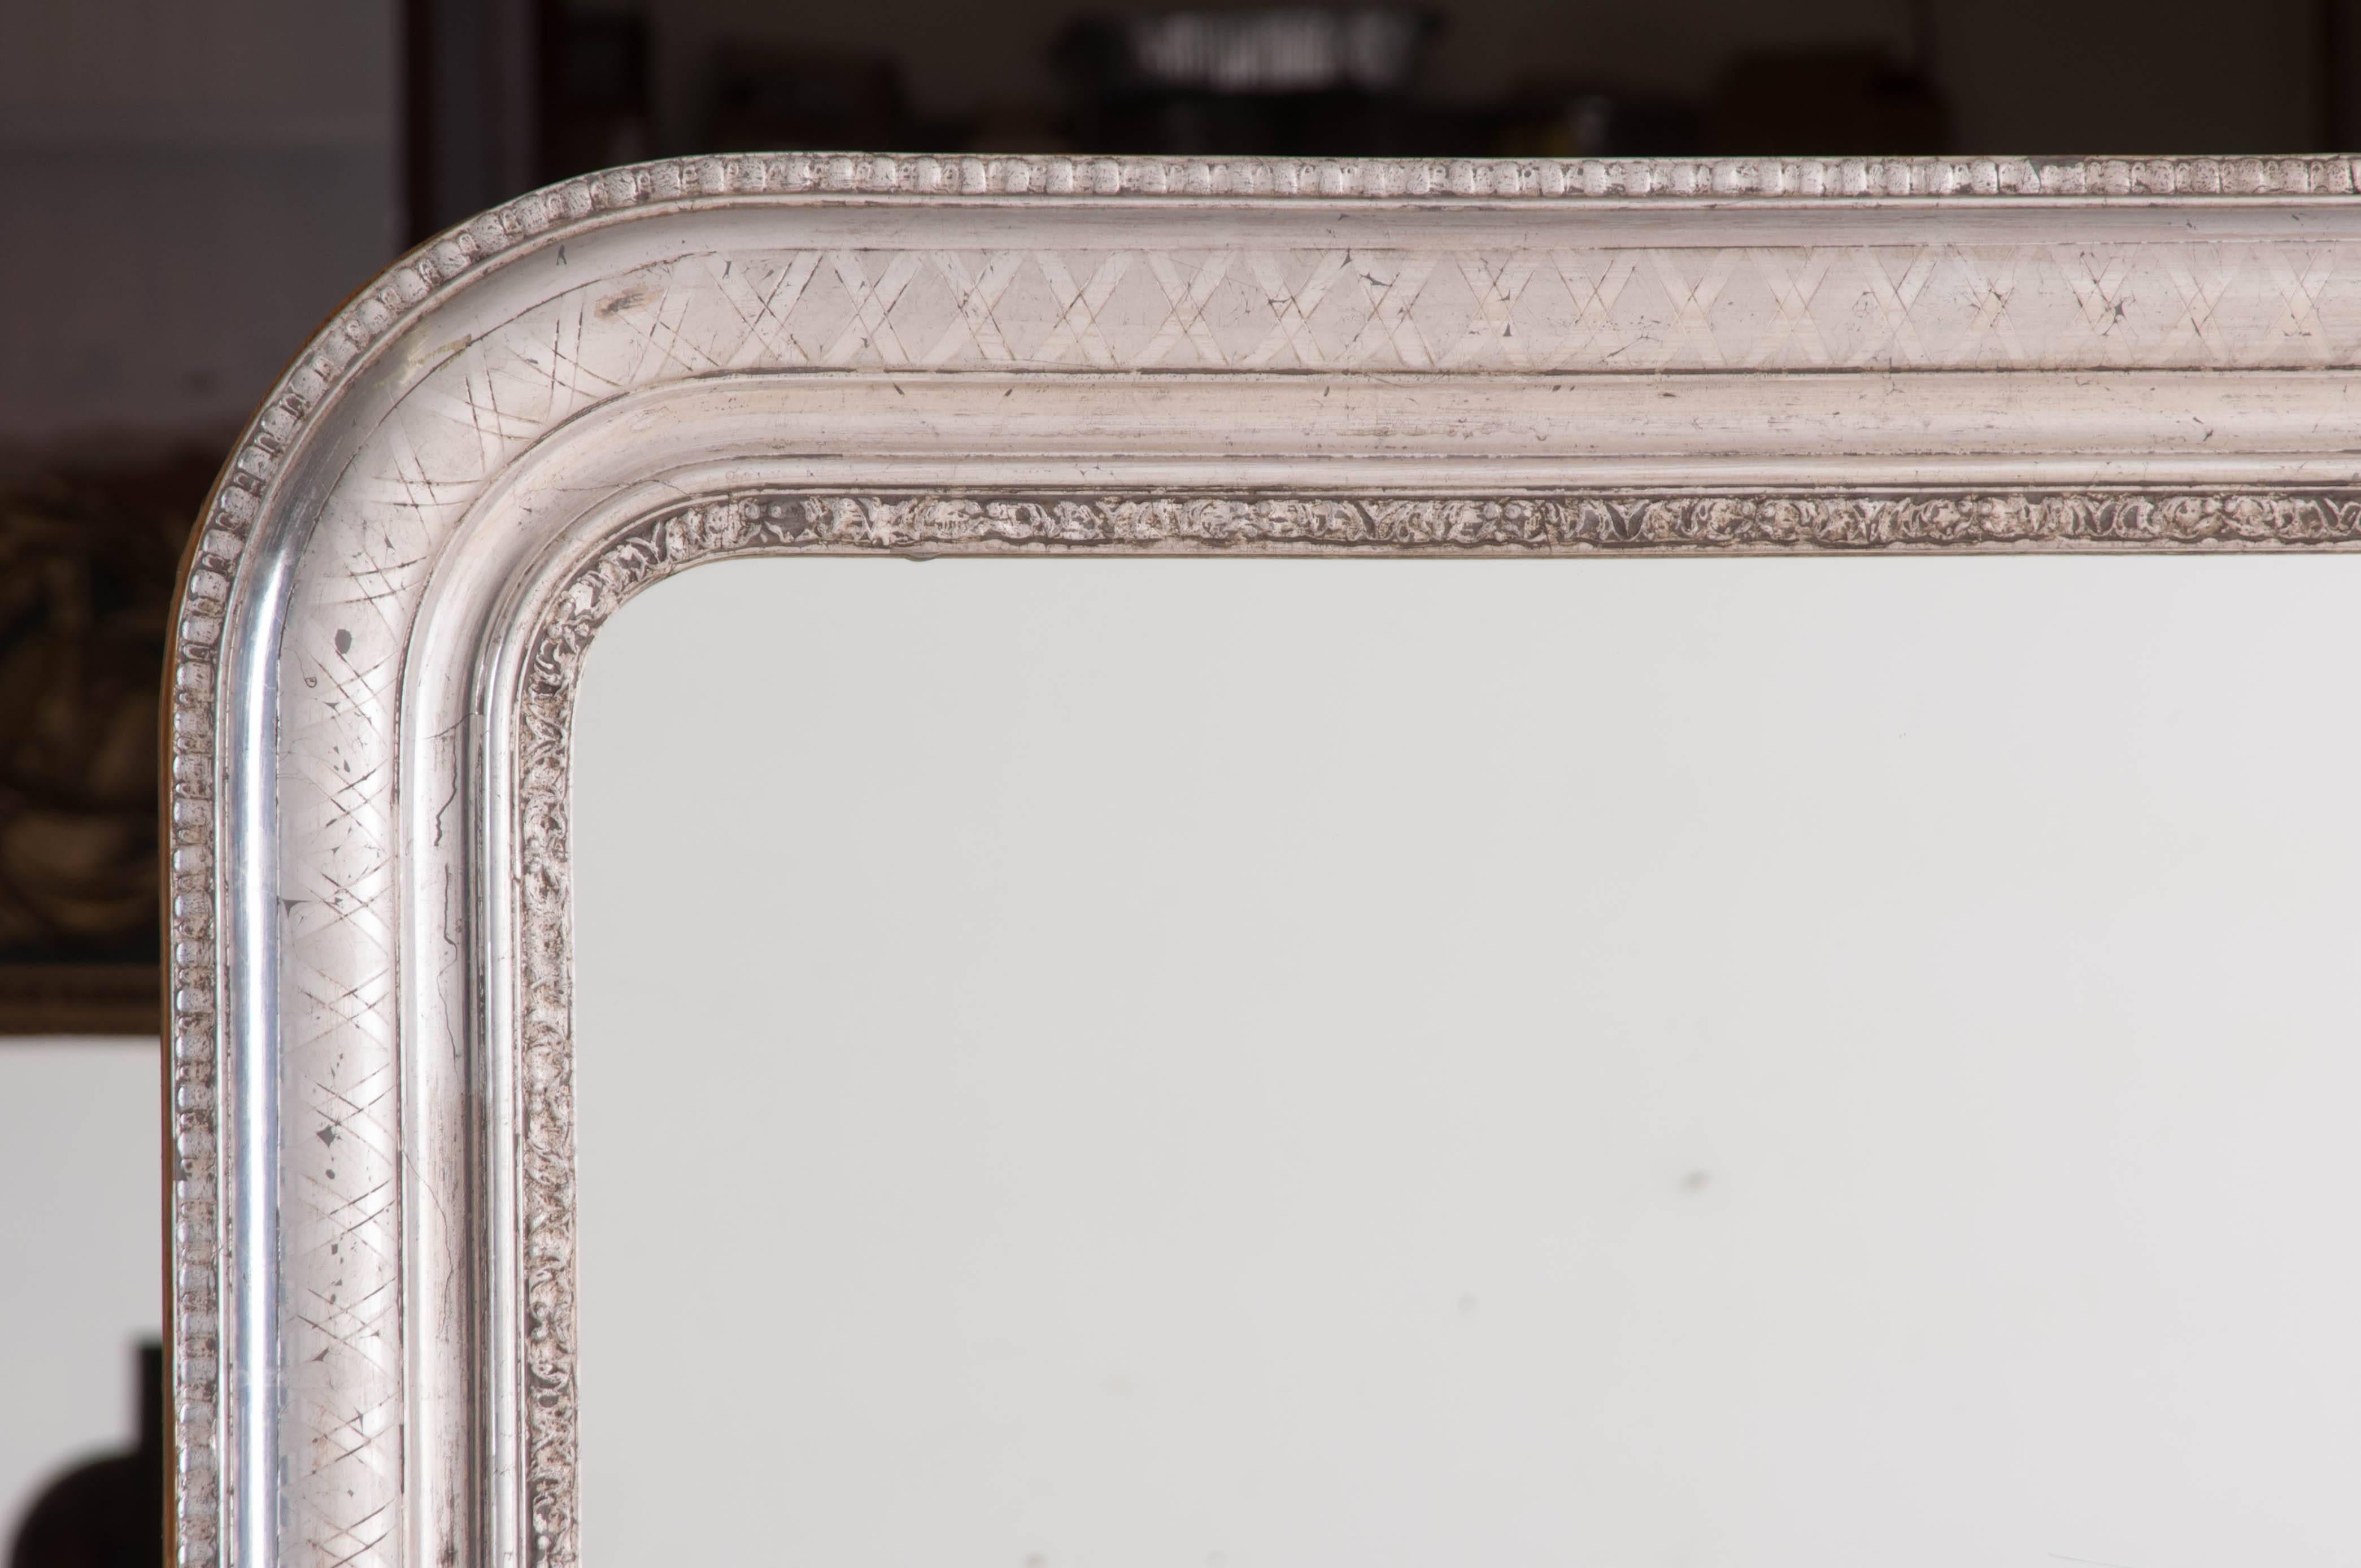 A beautiful, large Louis Philippe silver gilt mirror from 19th century, France. This Classic mirror will look amazing in any space. The frame has been embellished with a criss-crossed motif created with the metallic silver gilt that surrounds the